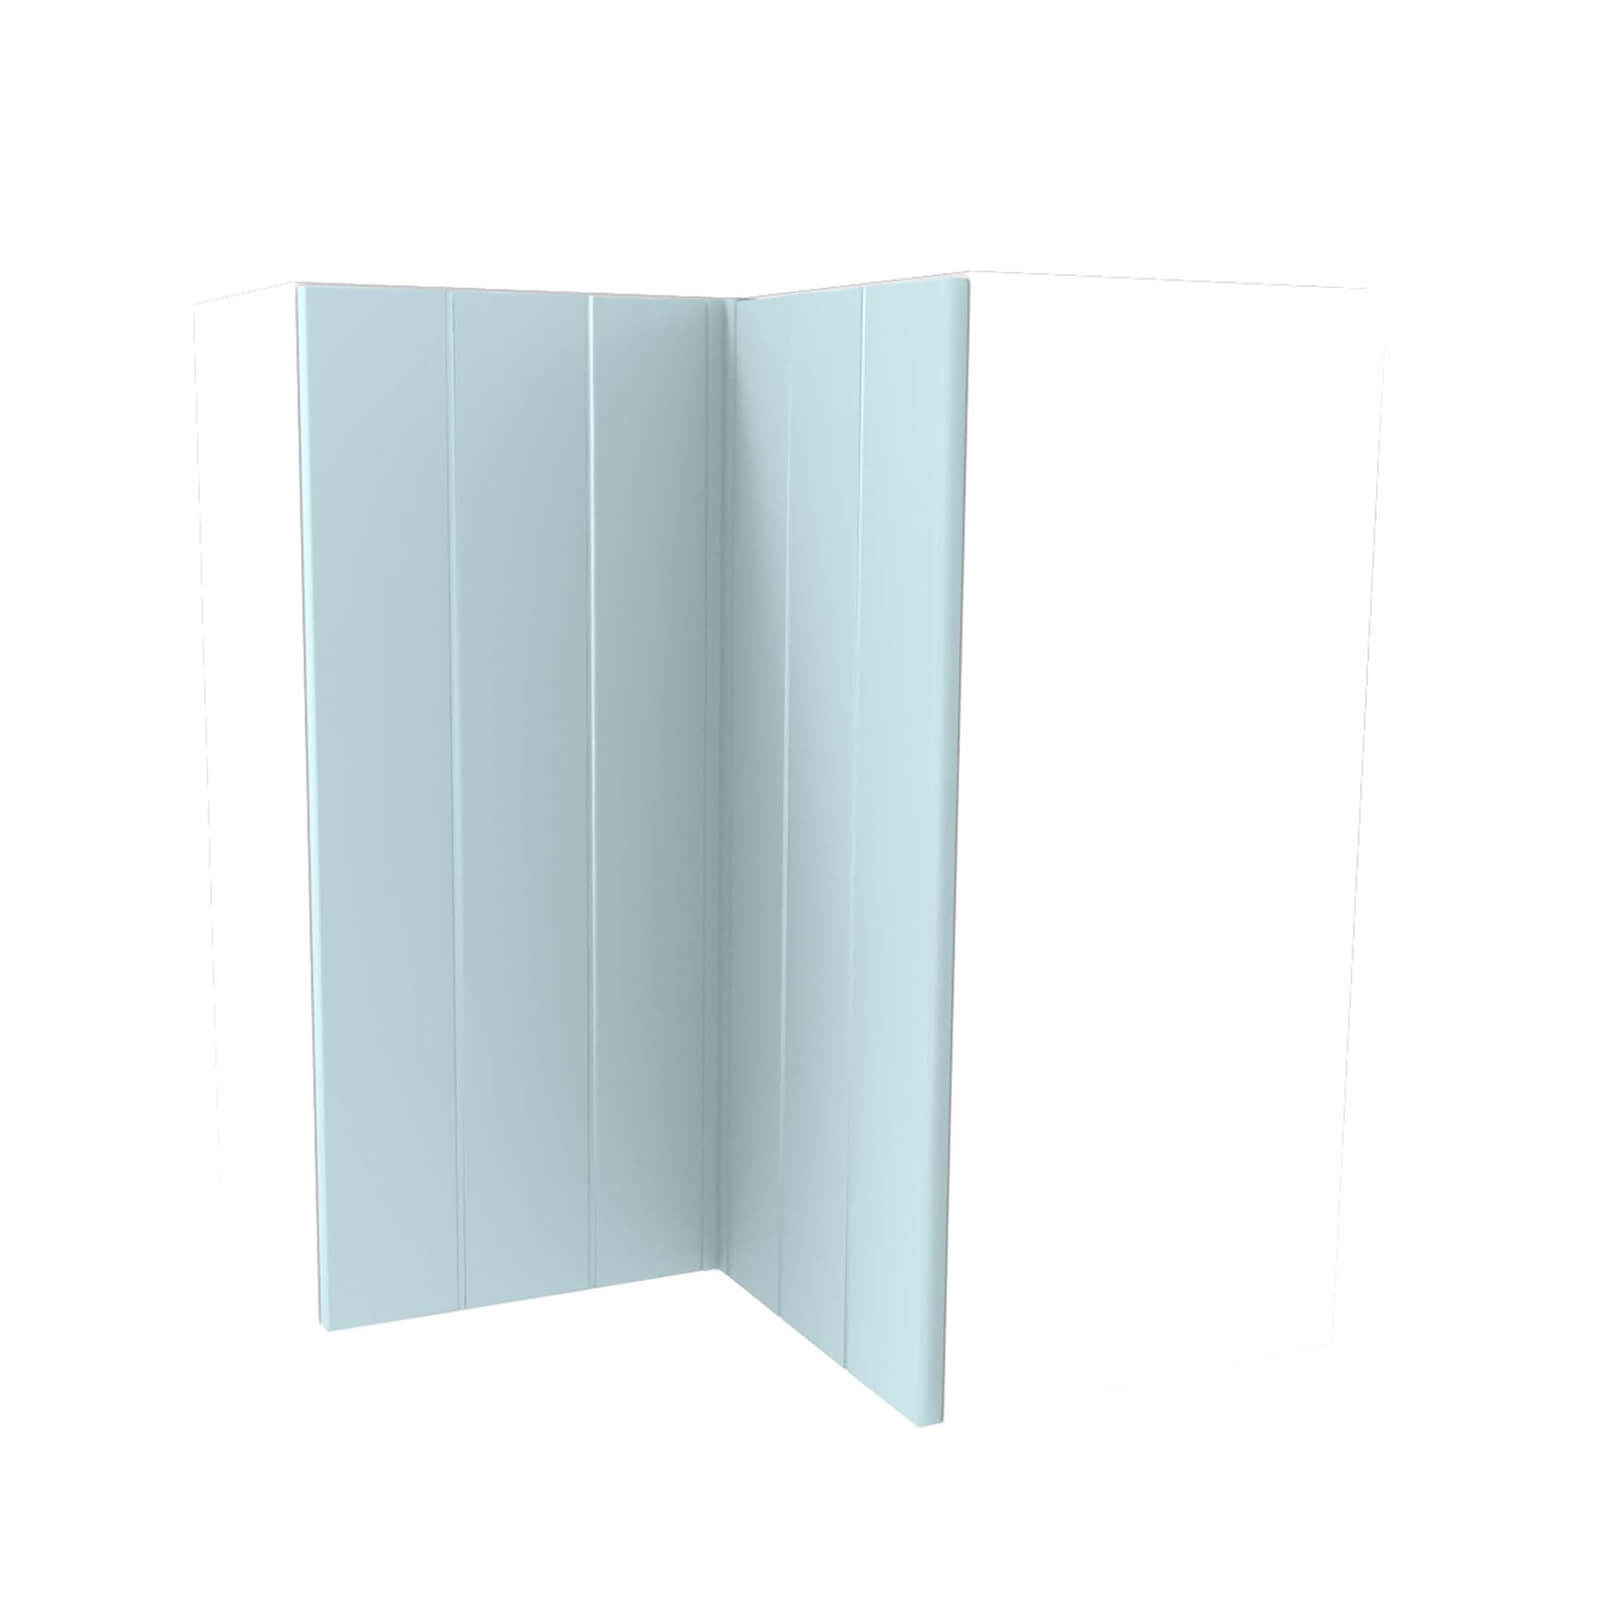 Photo of Country Light Blue 635mm Corner Wall Unit